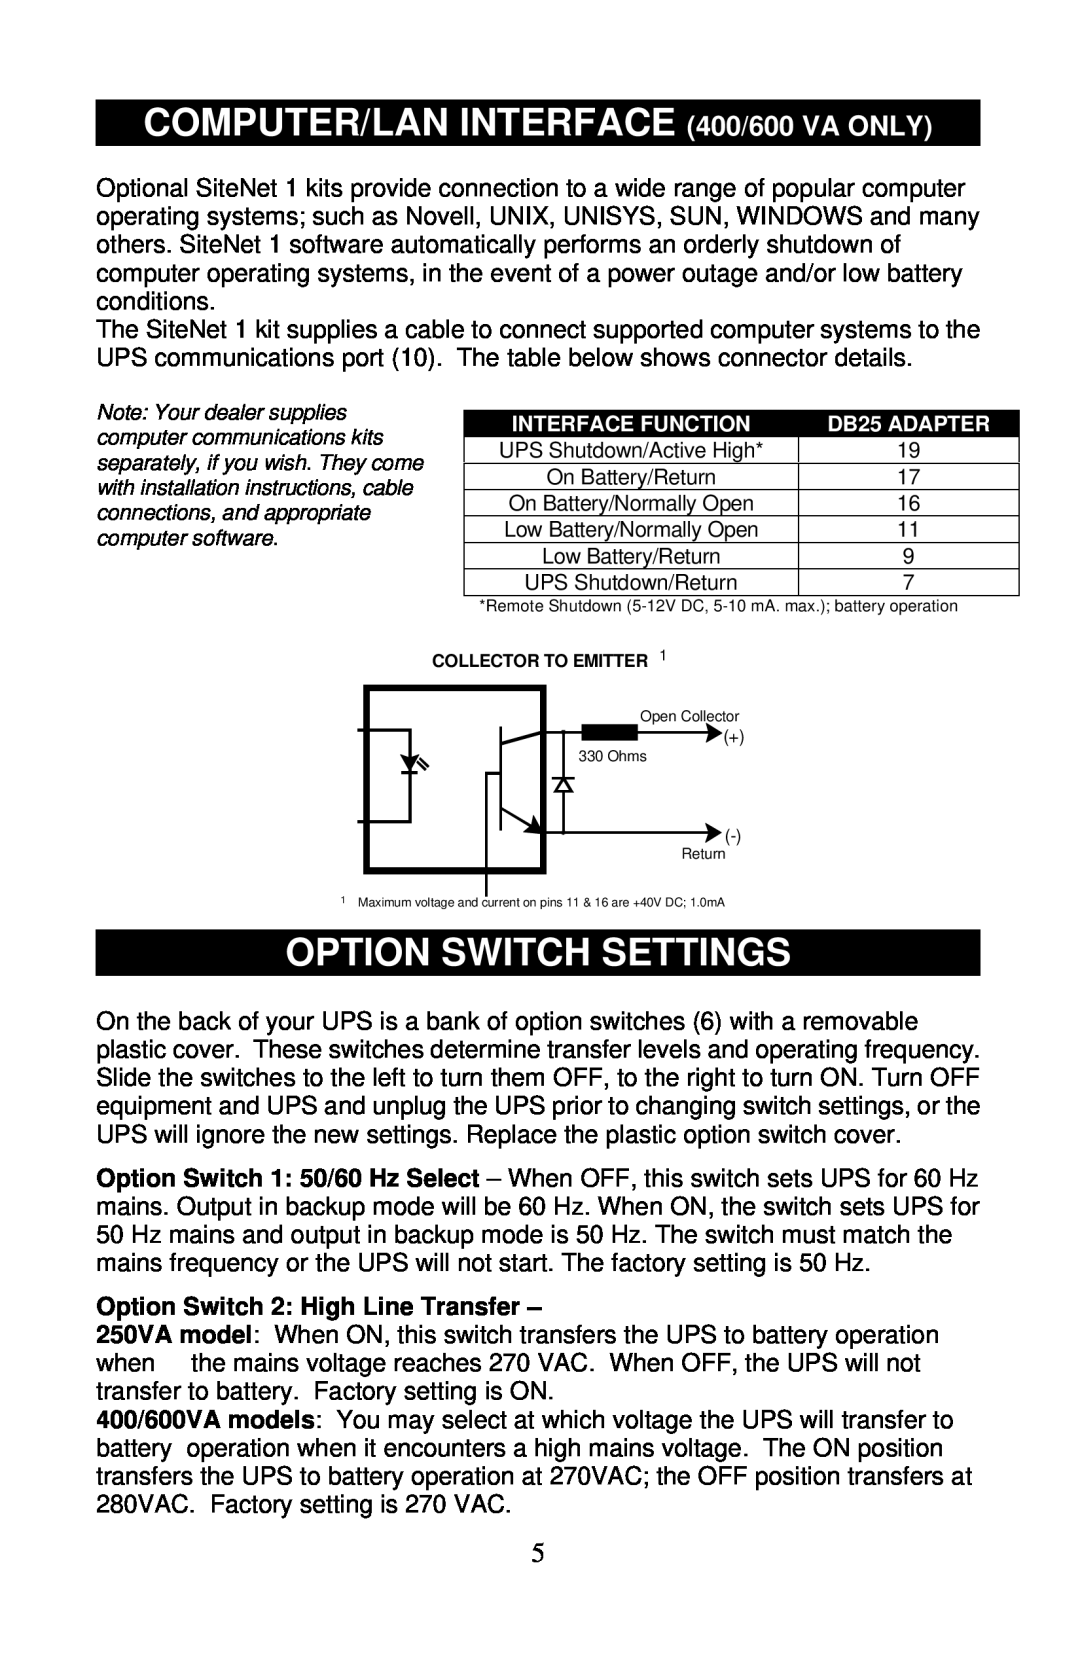 Liebert PS250-50S, PS400-50S, PS600-50S user manual COMPUTER/LAN INTERFACE 400/600 VA ONLY, Option Switch Settings 